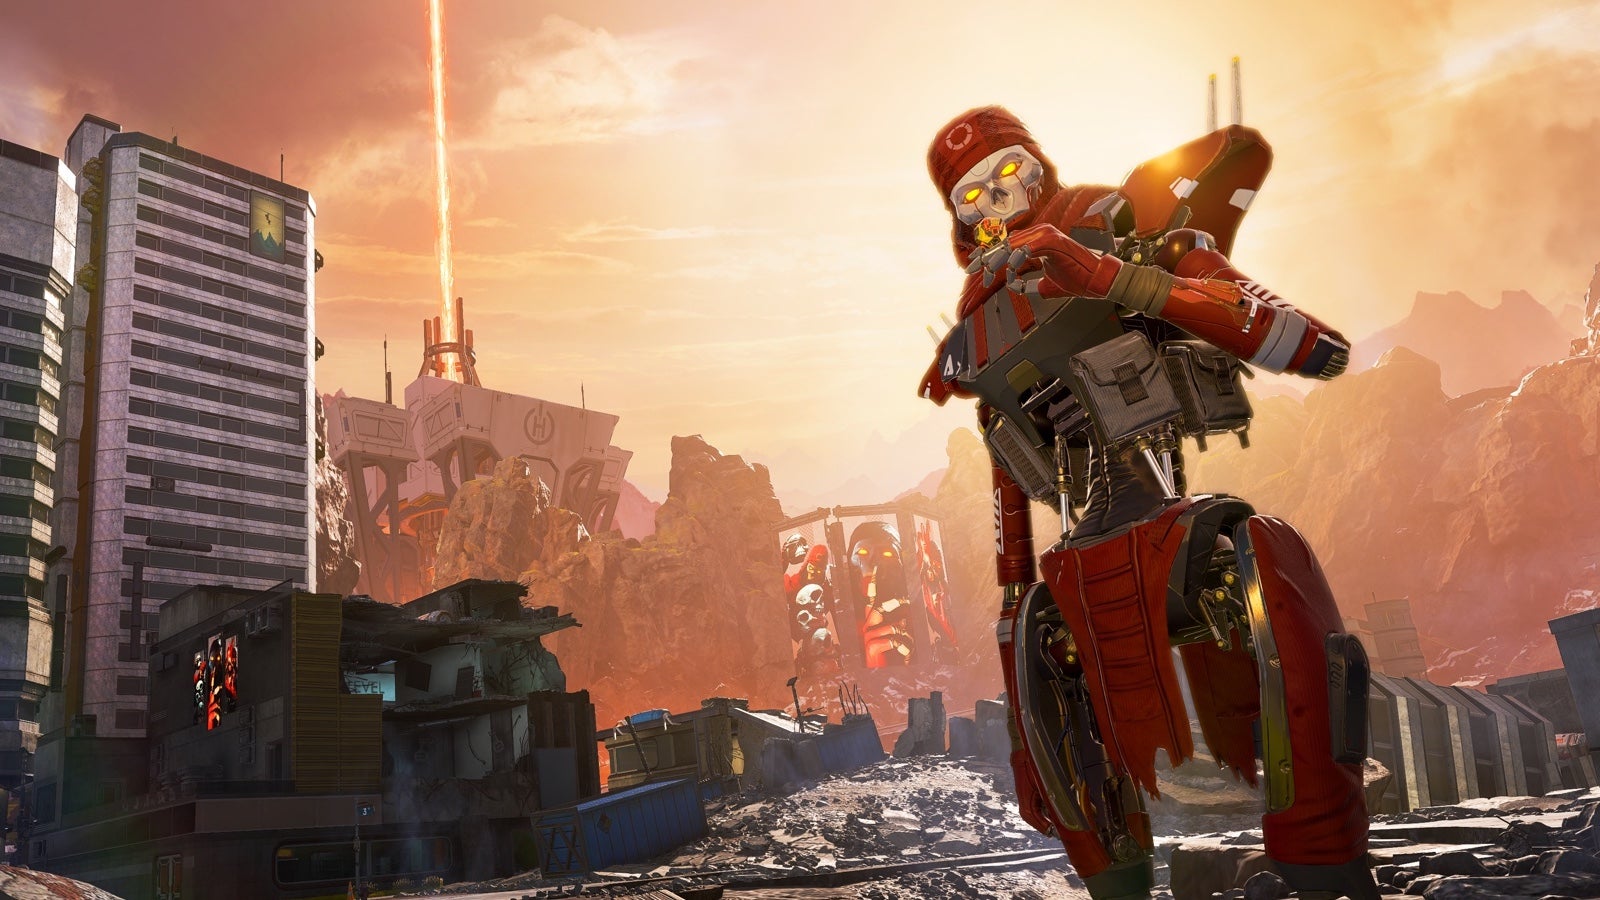 Image for Alleged Pandemic Crunch on Apex Legends Points to a Widespread Industry Issue